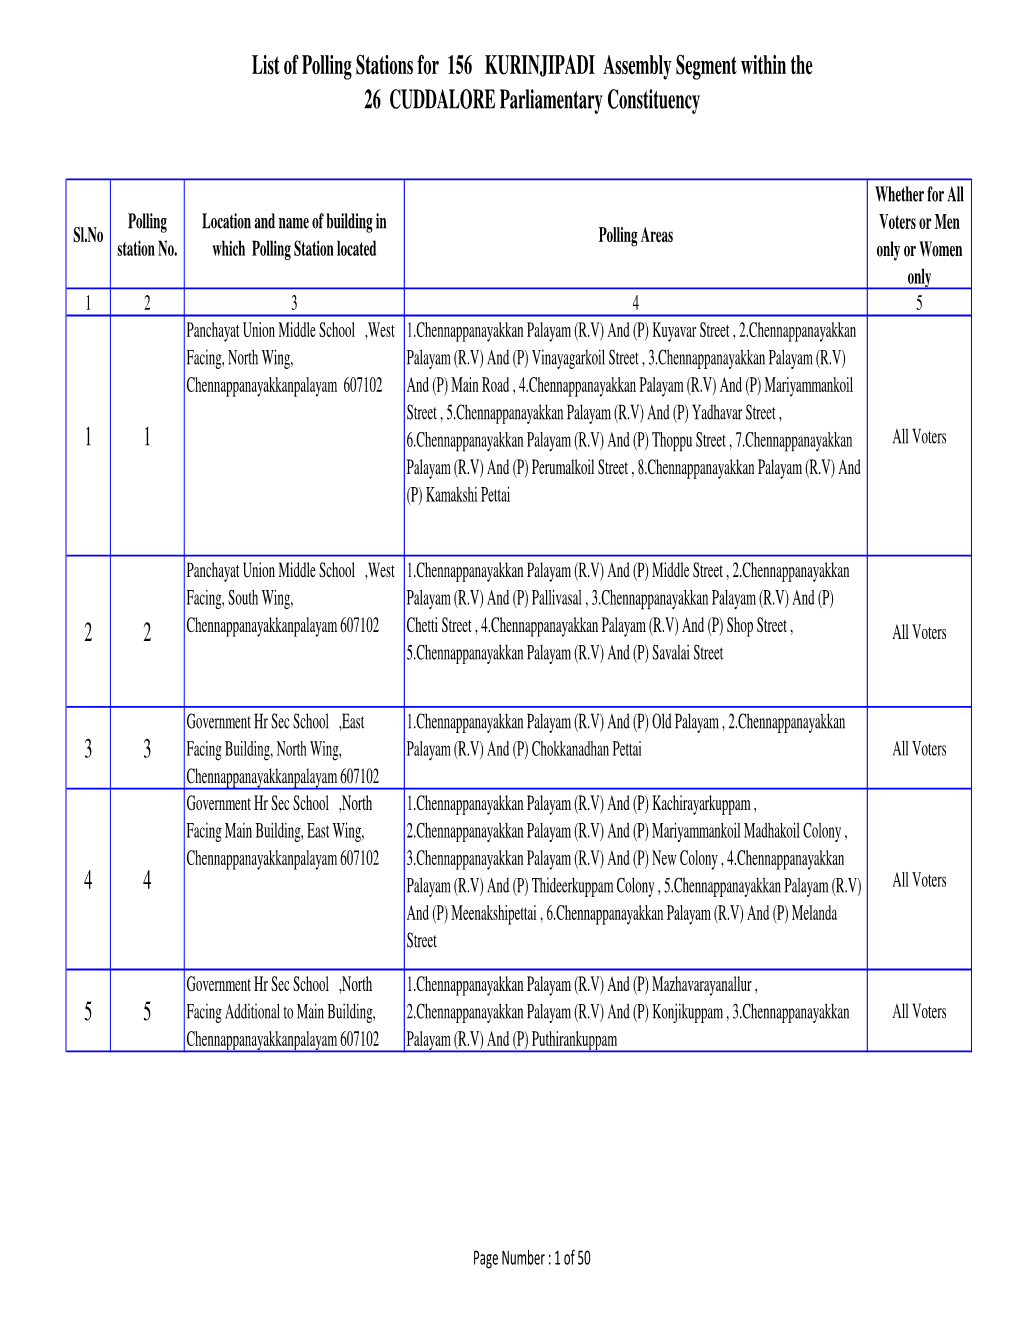 List of Polling Stations for 156 KURINJIPADI Assembly Segment Within the 26 CUDDALORE Parliamentary Constituency 1 1 2